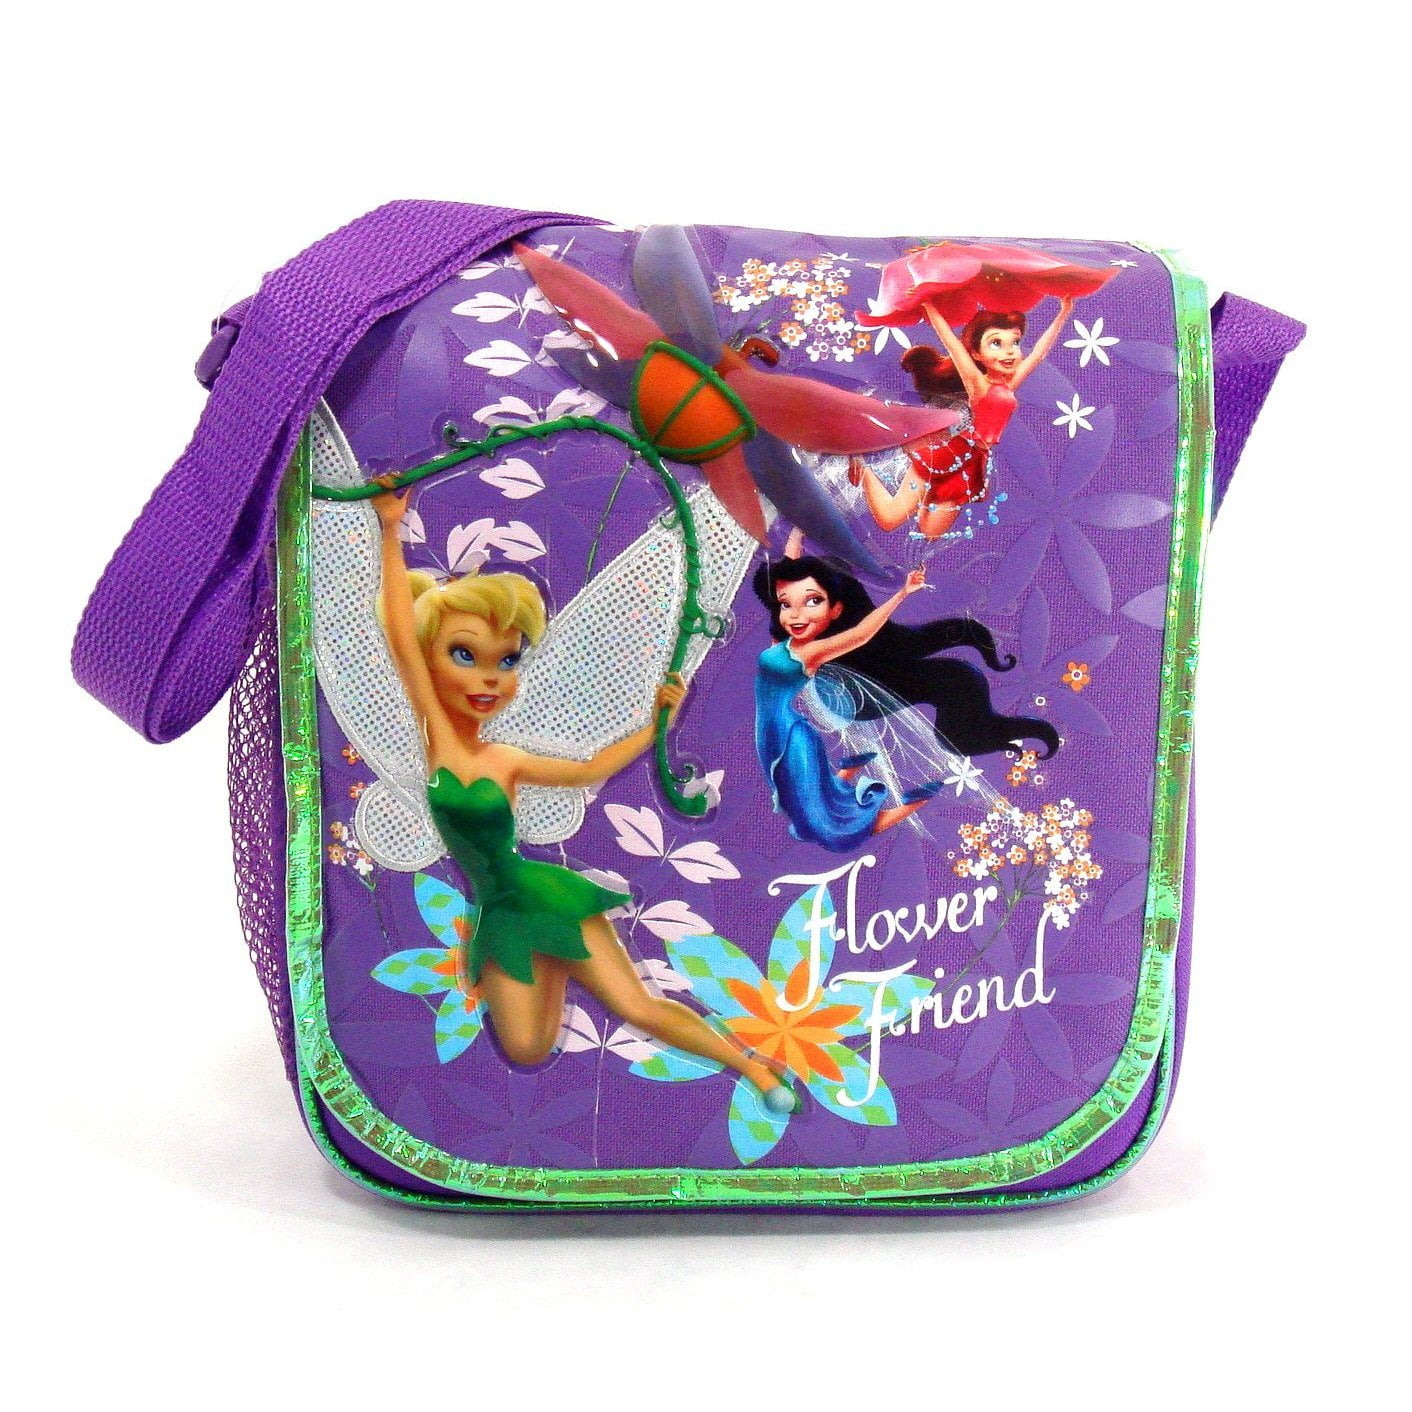 TINKER BELL DISNEY FAIRIES Girls Pink Lead-Free Insulated Lunch Tote Box NWT $20 